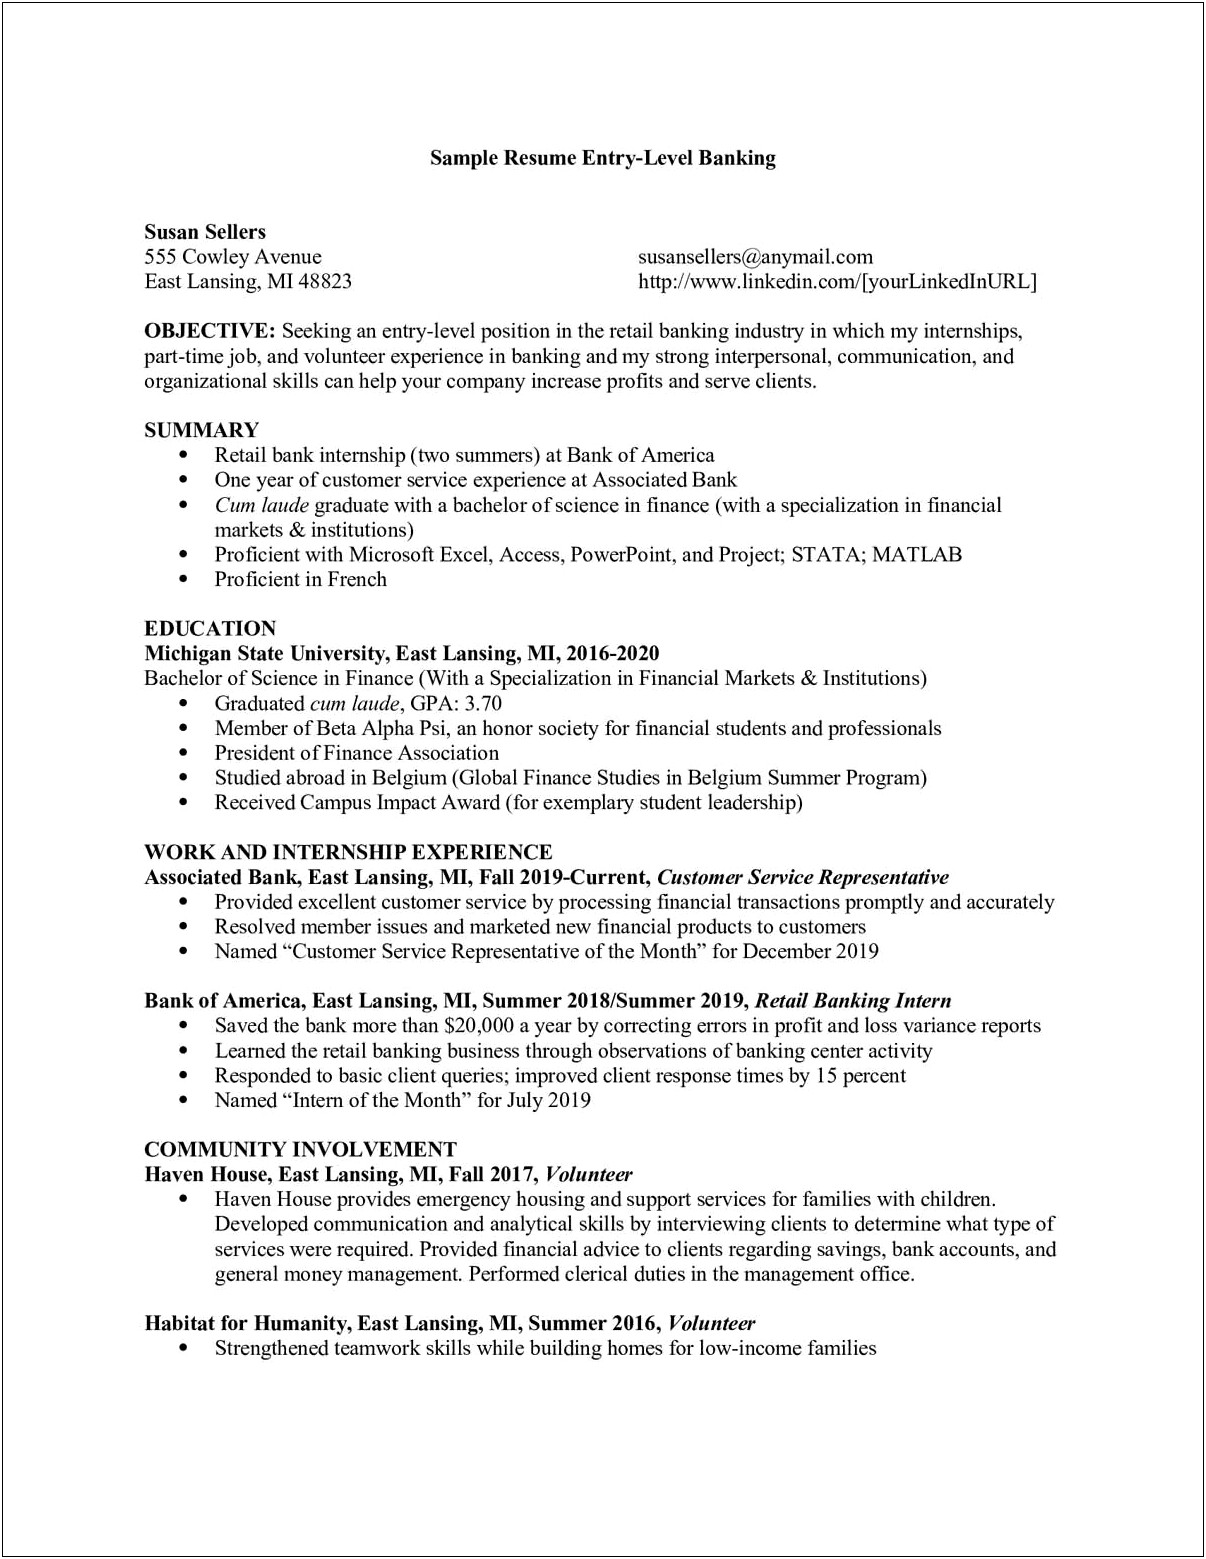 Good Objective Statements For Entry Level Resume